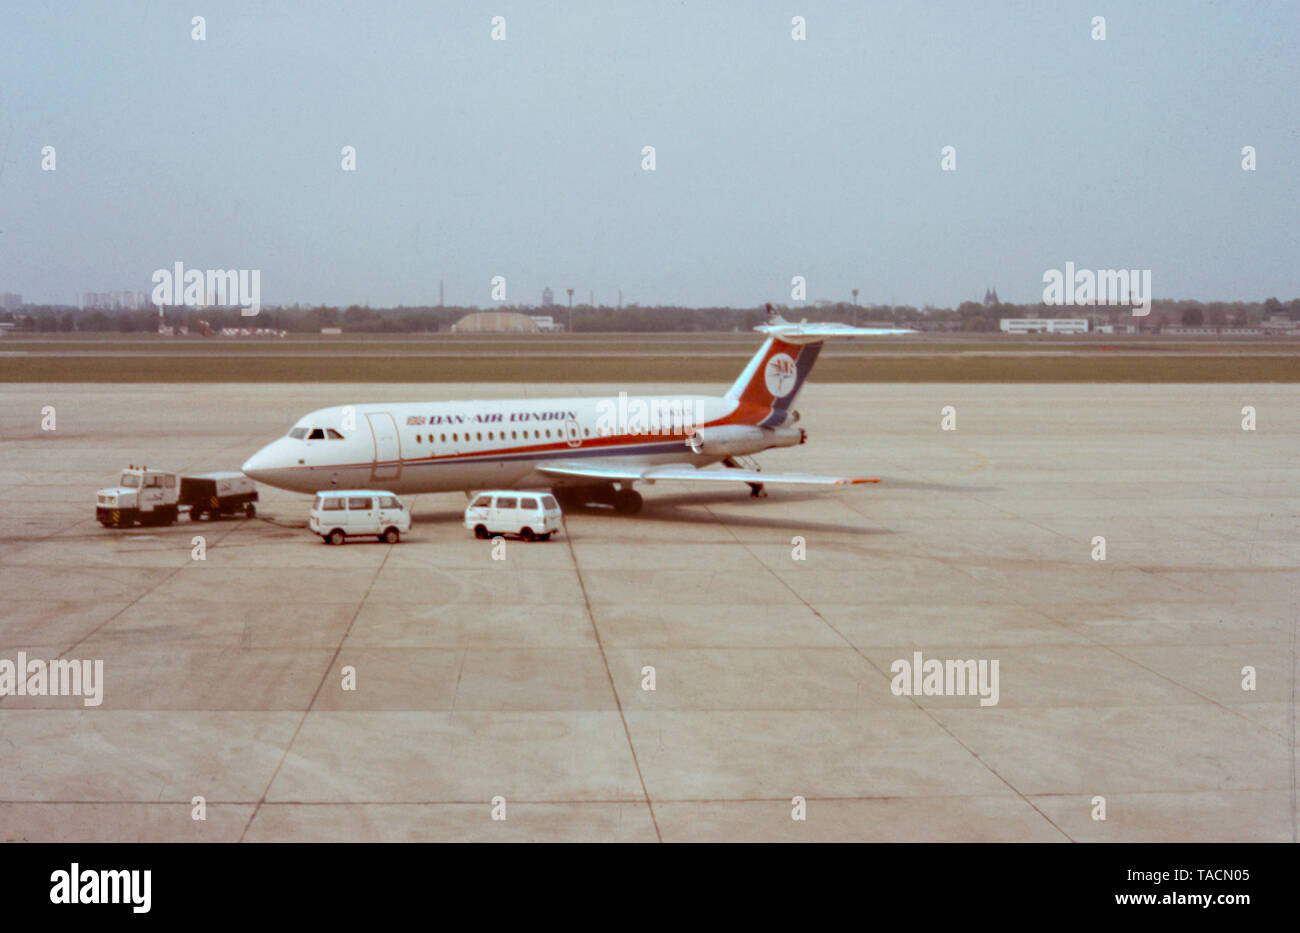 Dan-Air London BAC 1-11-414EG aircraft being serviced on the tarmac at Berlin Tegel Airport (TXL)  ca.1985 , Berlin, Germany, Europe - archive image Stock Photo